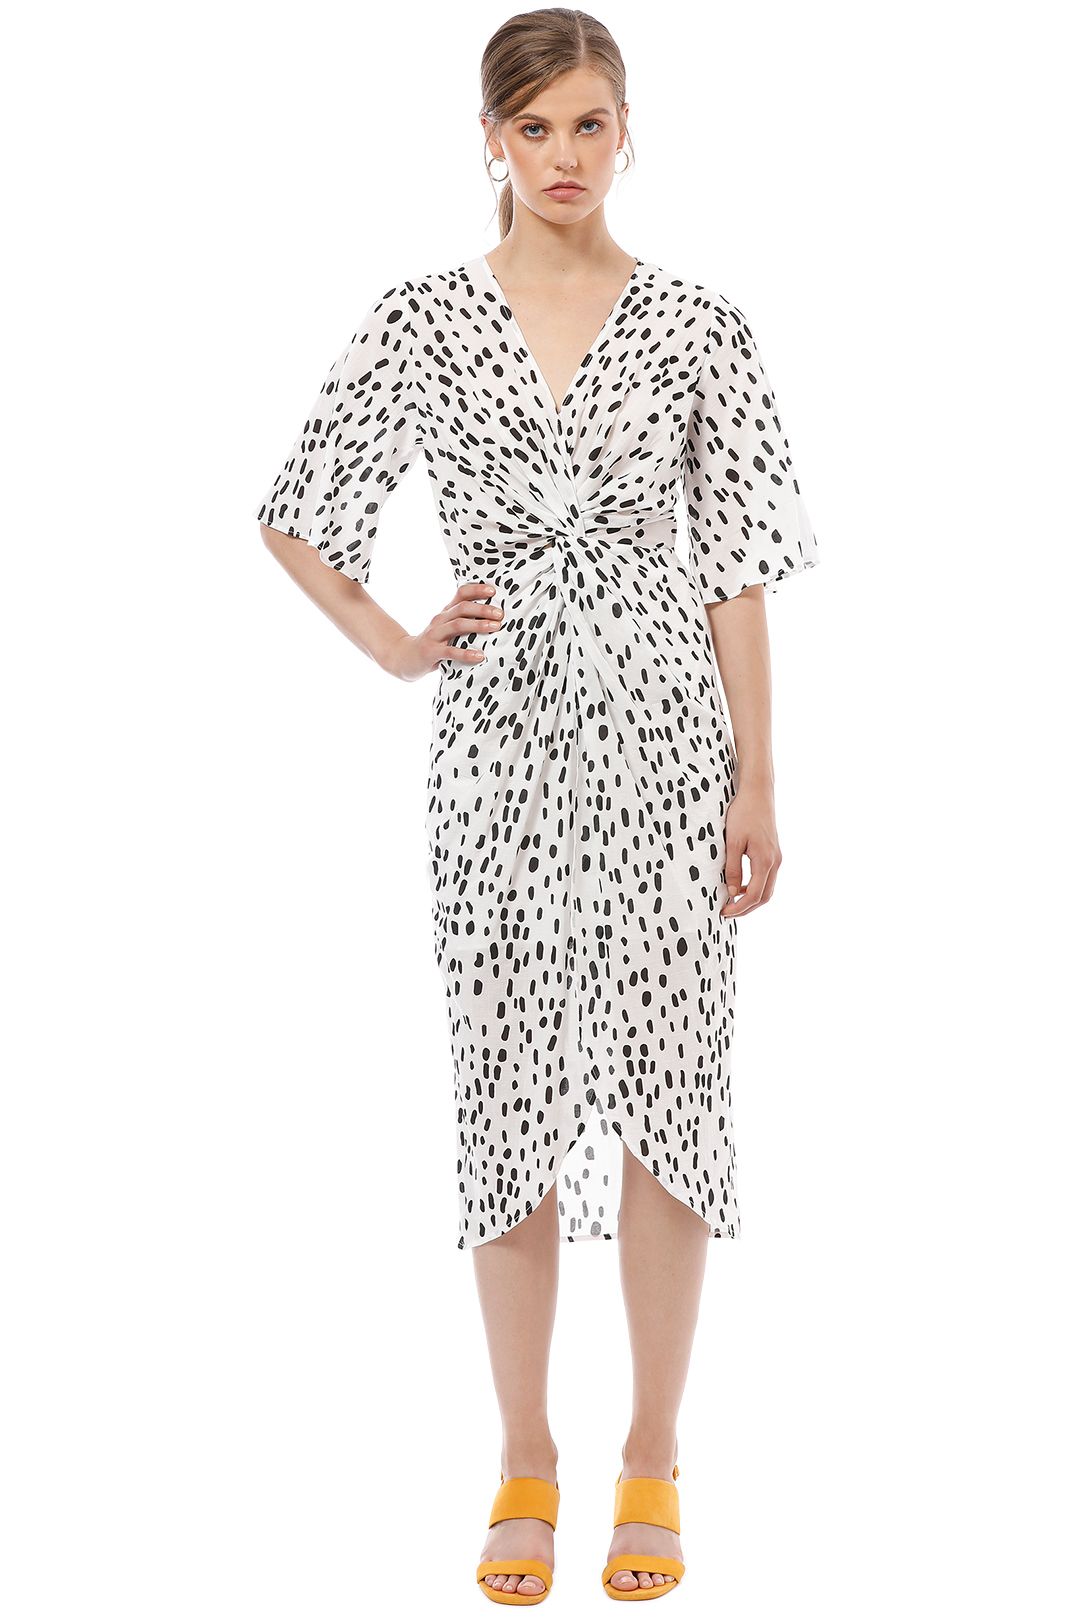 Friend of Audrey - Lucie Polka Dot Wrap Dress - White - Front